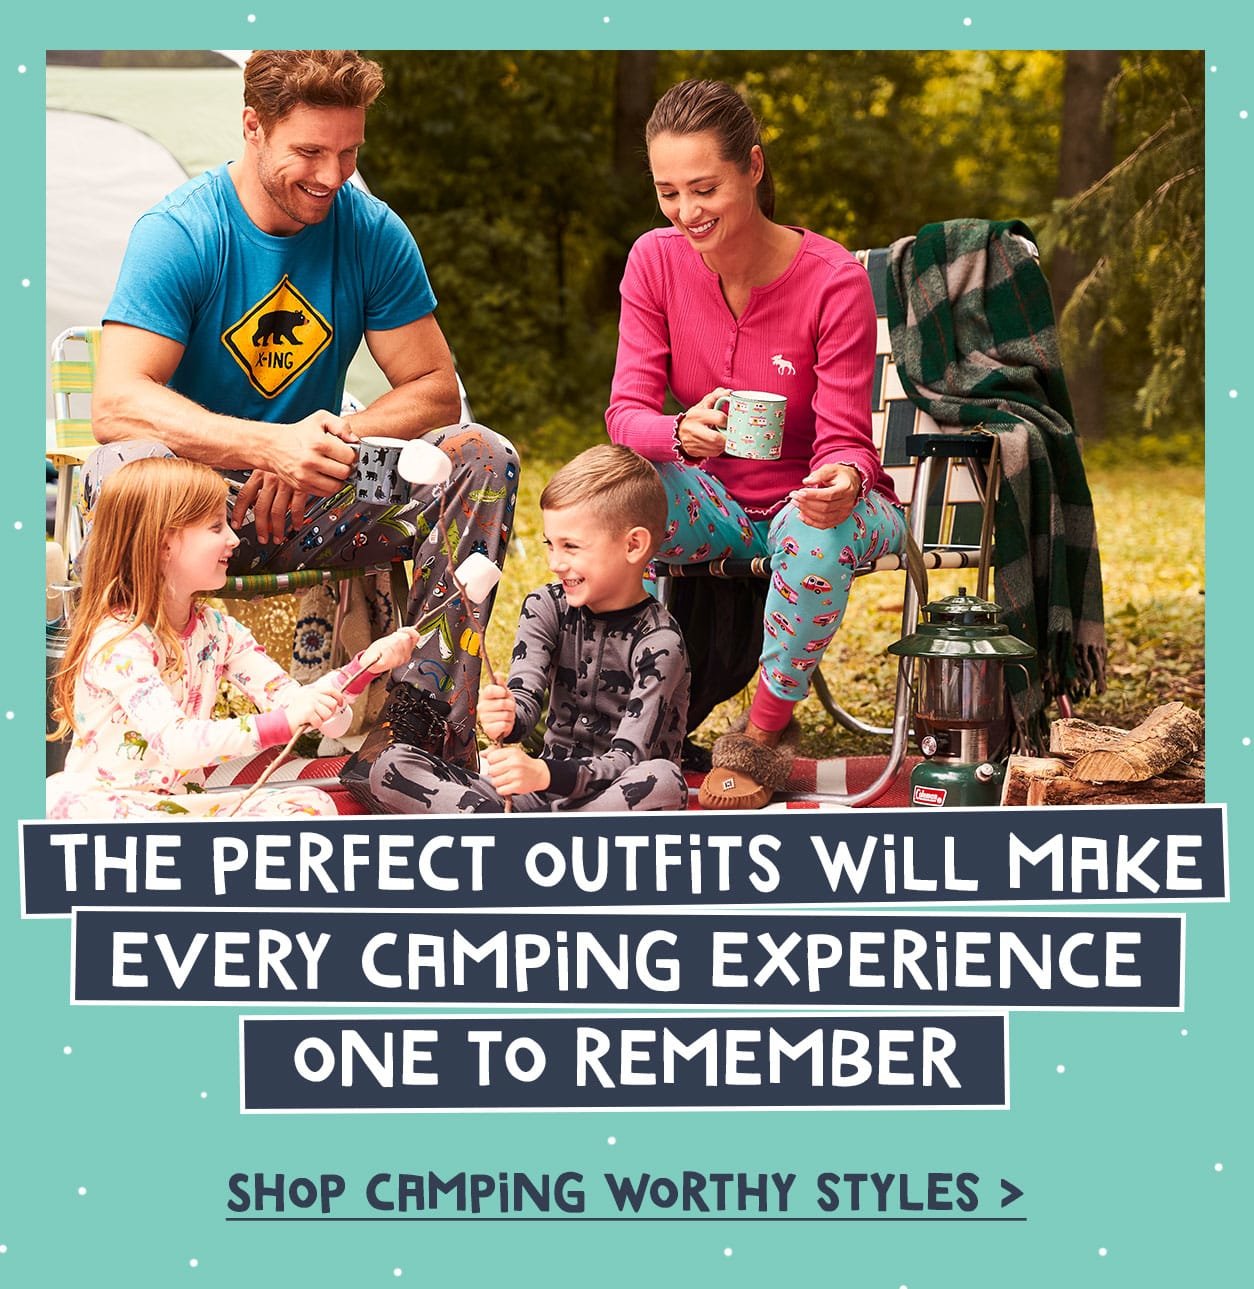 Camping styles